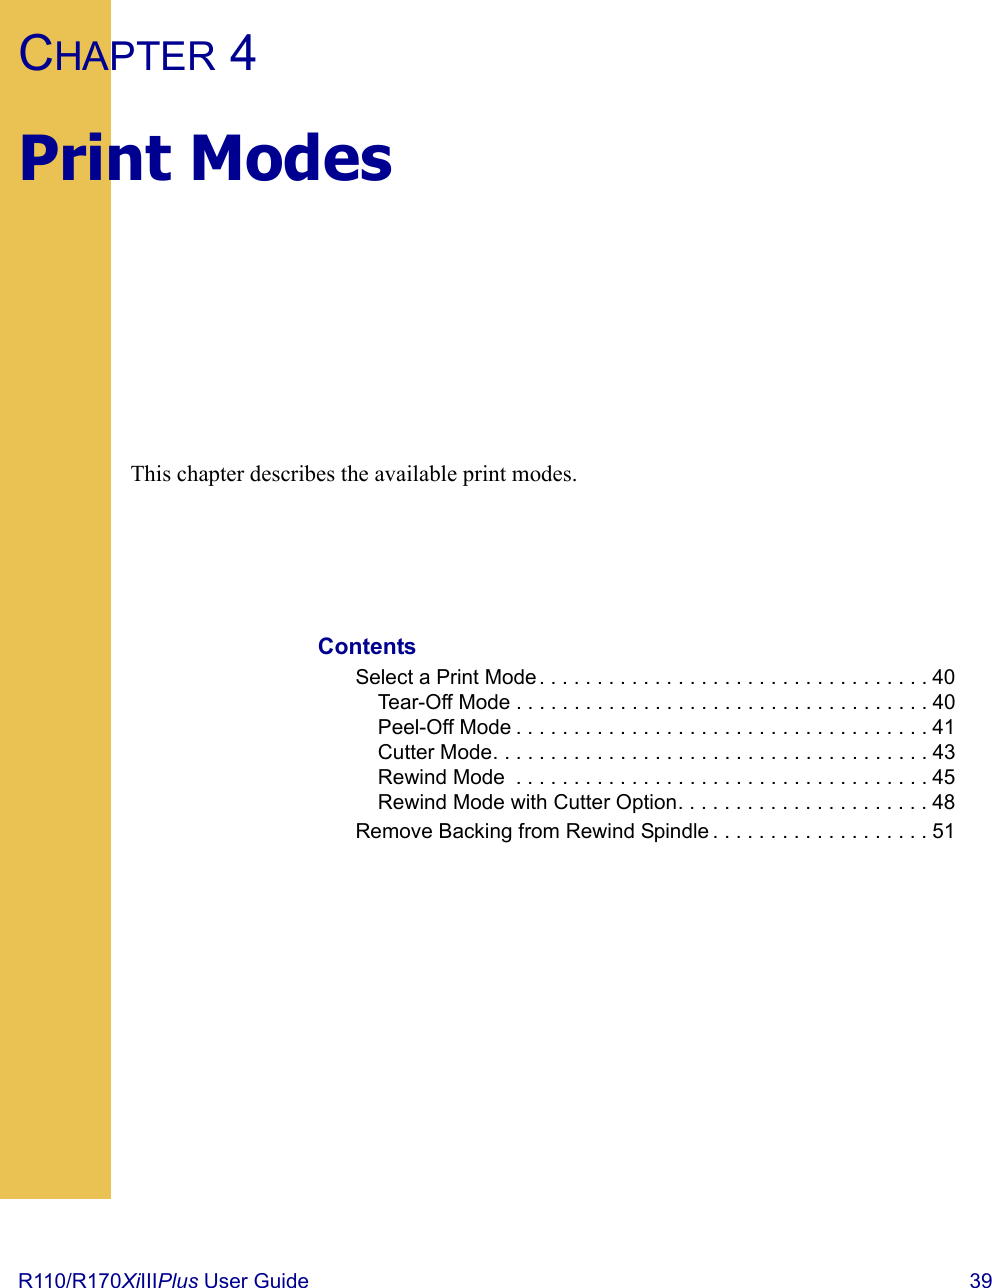 R110/R170XiIIIPlus User Guide  39CHAPTER 4Print ModesThis chapter describes the available print modes.ContentsSelect a Print Mode . . . . . . . . . . . . . . . . . . . . . . . . . . . . . . . . . . 40Tear-Off Mode . . . . . . . . . . . . . . . . . . . . . . . . . . . . . . . . . . . . 40Peel-Off Mode . . . . . . . . . . . . . . . . . . . . . . . . . . . . . . . . . . . . 41Cutter Mode. . . . . . . . . . . . . . . . . . . . . . . . . . . . . . . . . . . . . . 43Rewind Mode  . . . . . . . . . . . . . . . . . . . . . . . . . . . . . . . . . . . . 45Rewind Mode with Cutter Option. . . . . . . . . . . . . . . . . . . . . . 48Remove Backing from Rewind Spindle . . . . . . . . . . . . . . . . . . . 51